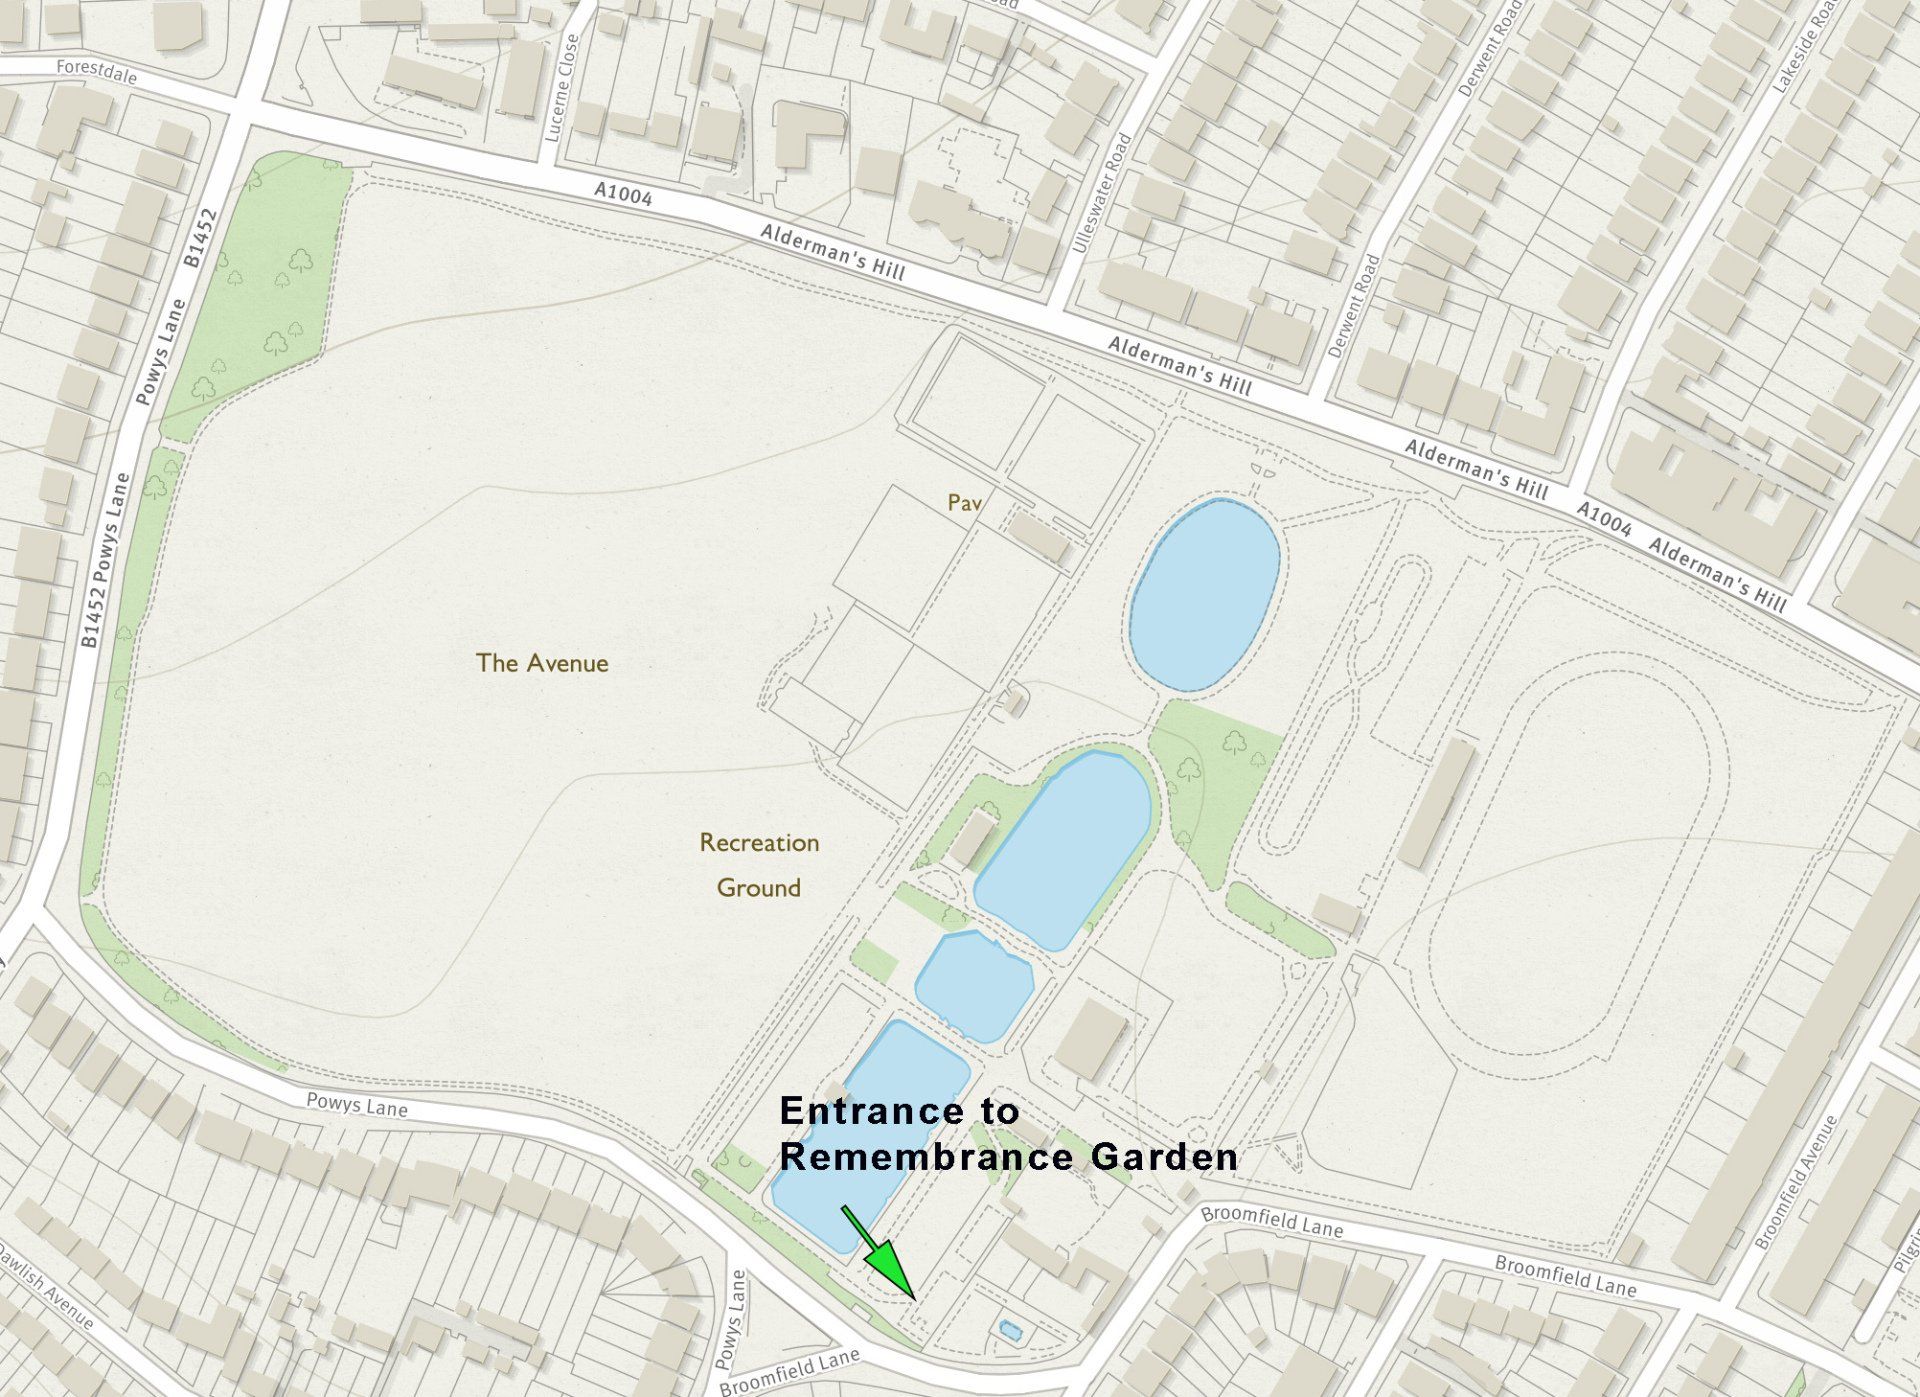 A map showing the entrance to the remembrance garden